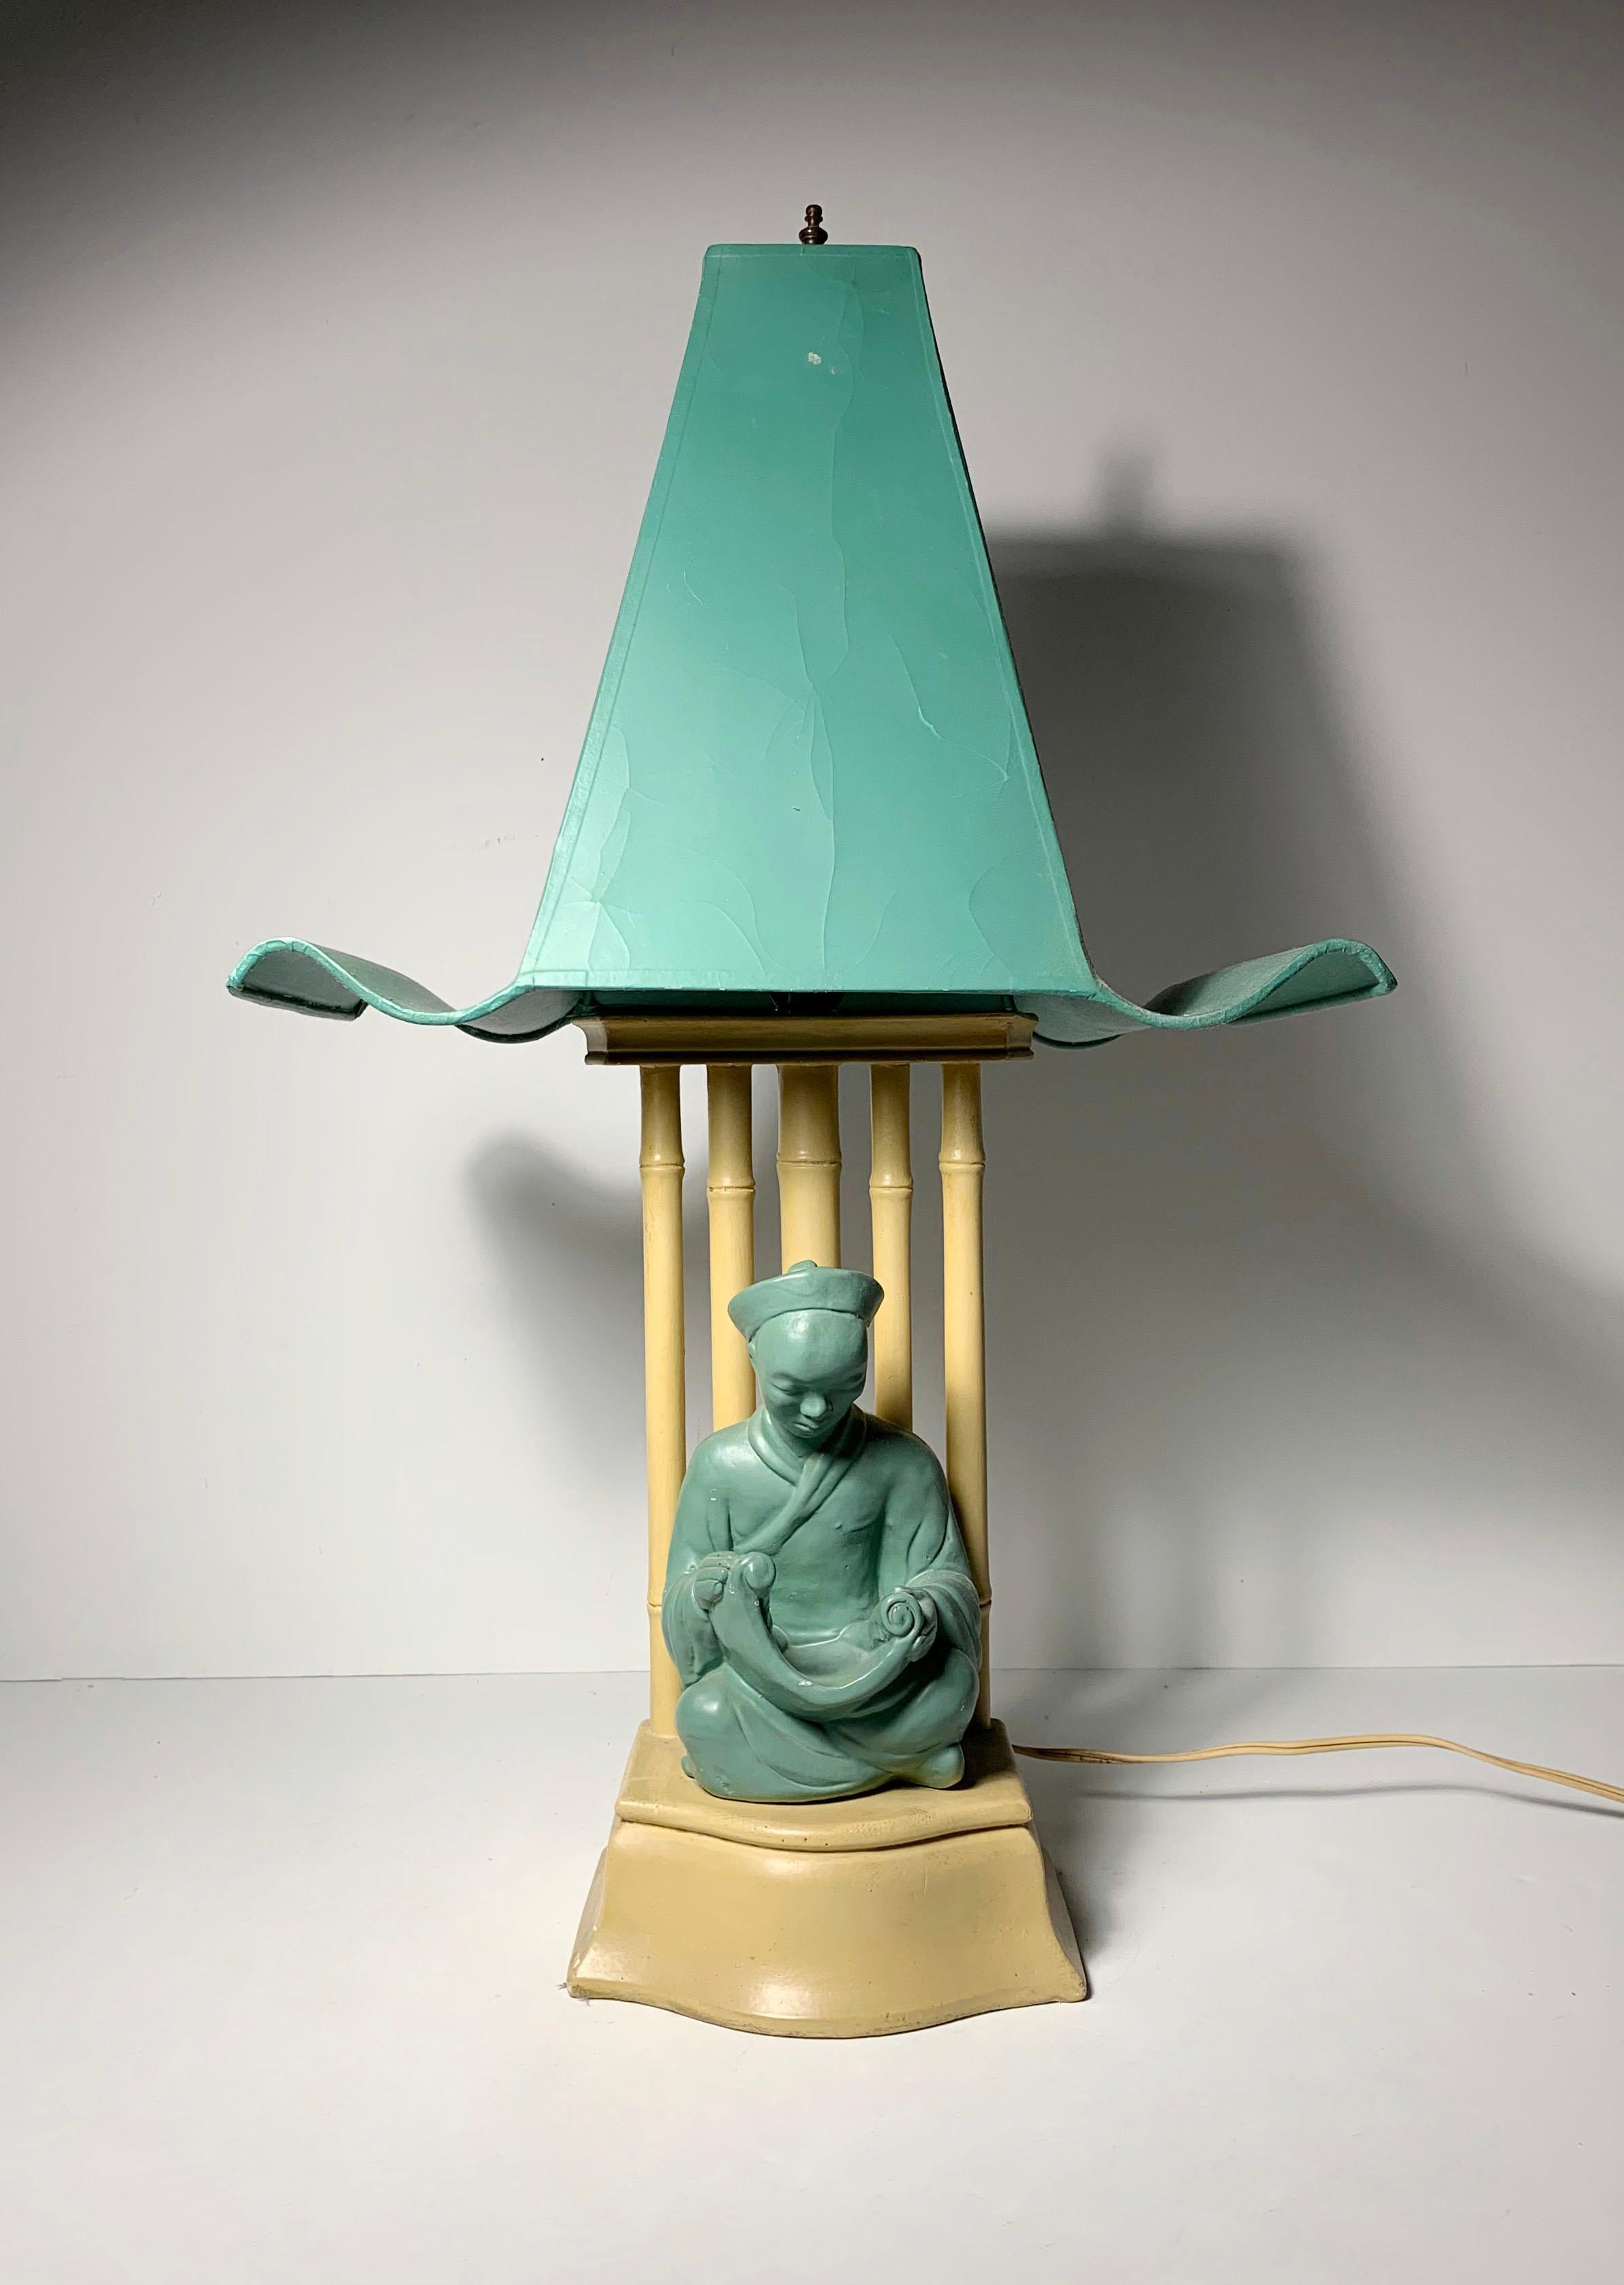 Vintage 1950s Buddha Style Lamp. Style of James Mont.
Dimensions are with the shade assembled.
 